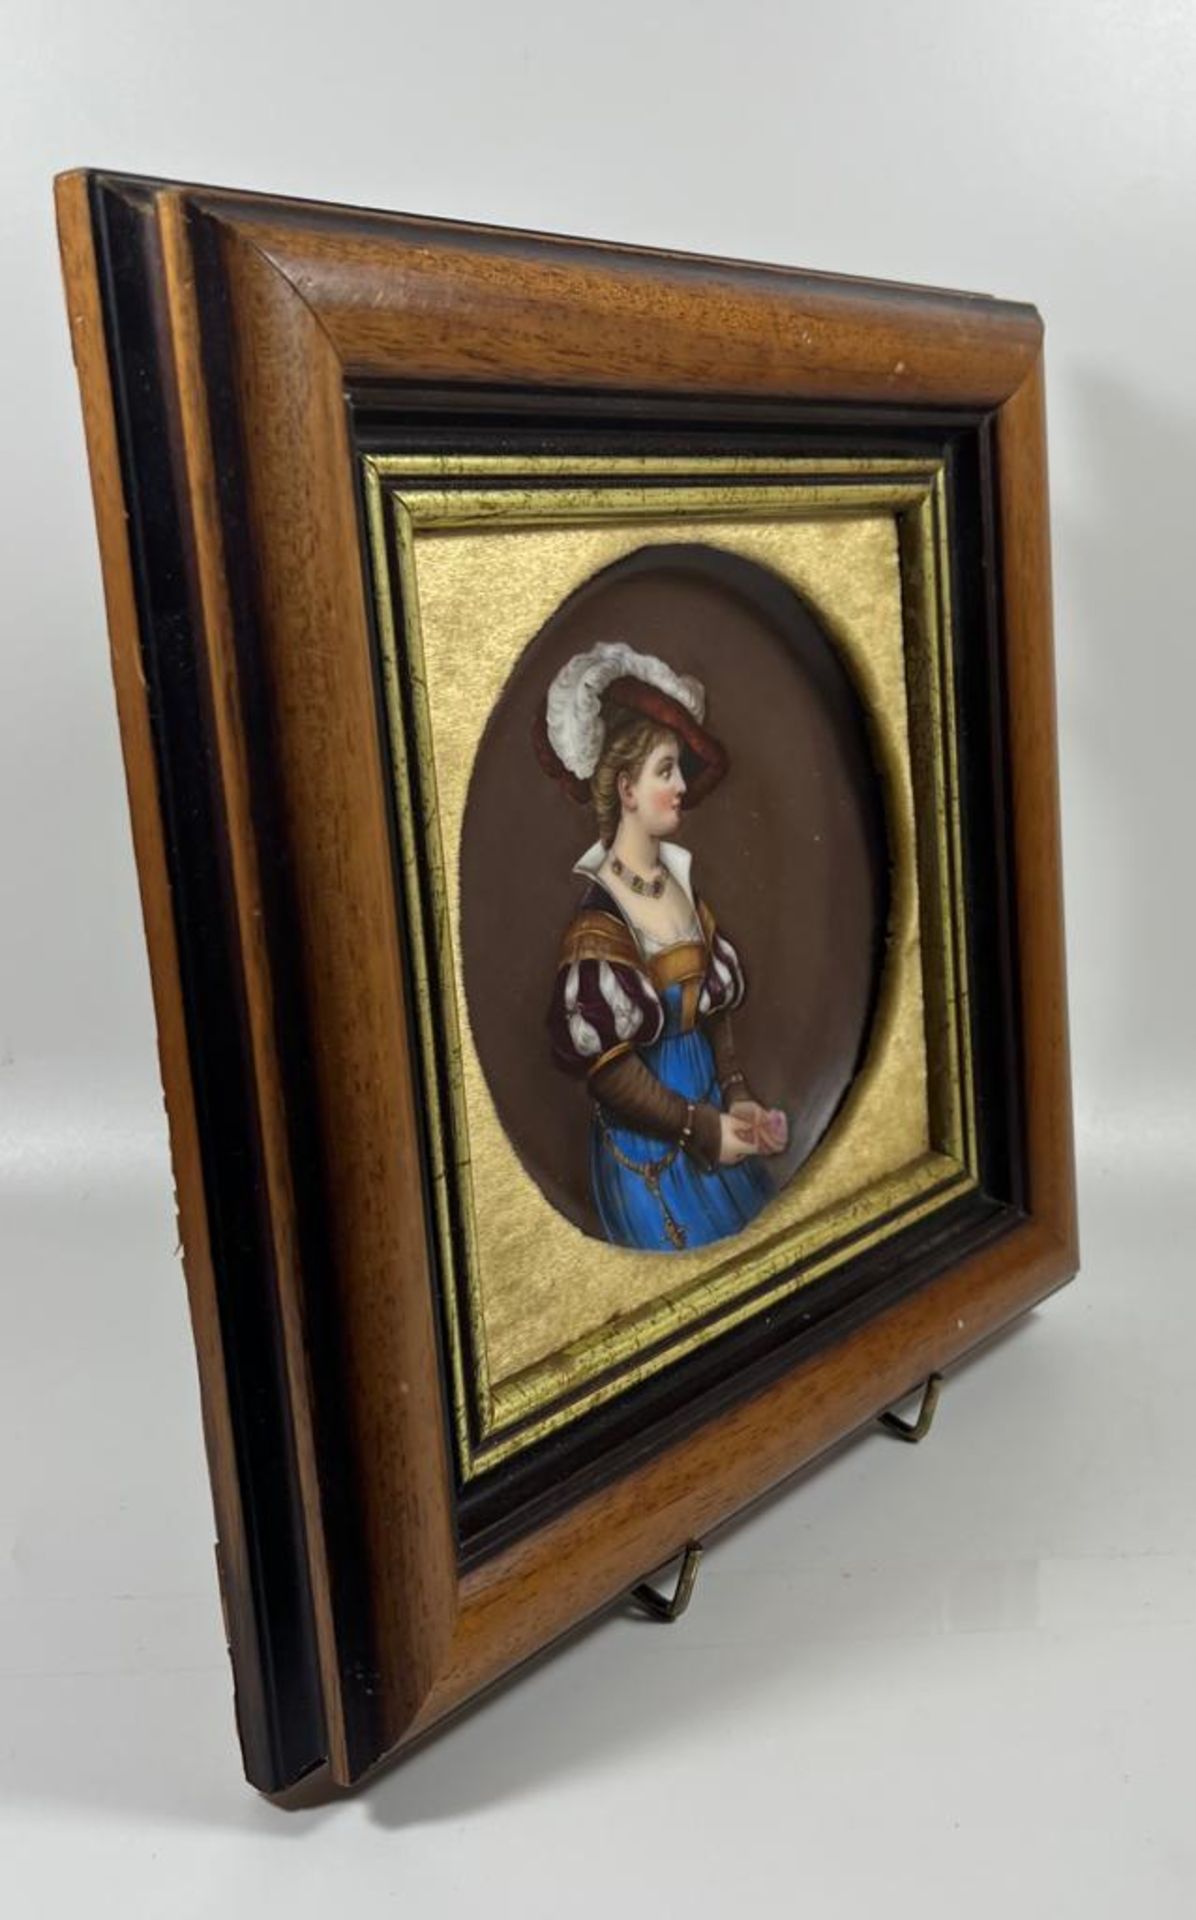 A 19TH CENTURY FRAMED HAND PAINTED PORCELAIN PLAQUE DEPICTING A LADY WITH A FEATHERED HAT, 27 X 26CM - Image 2 of 6